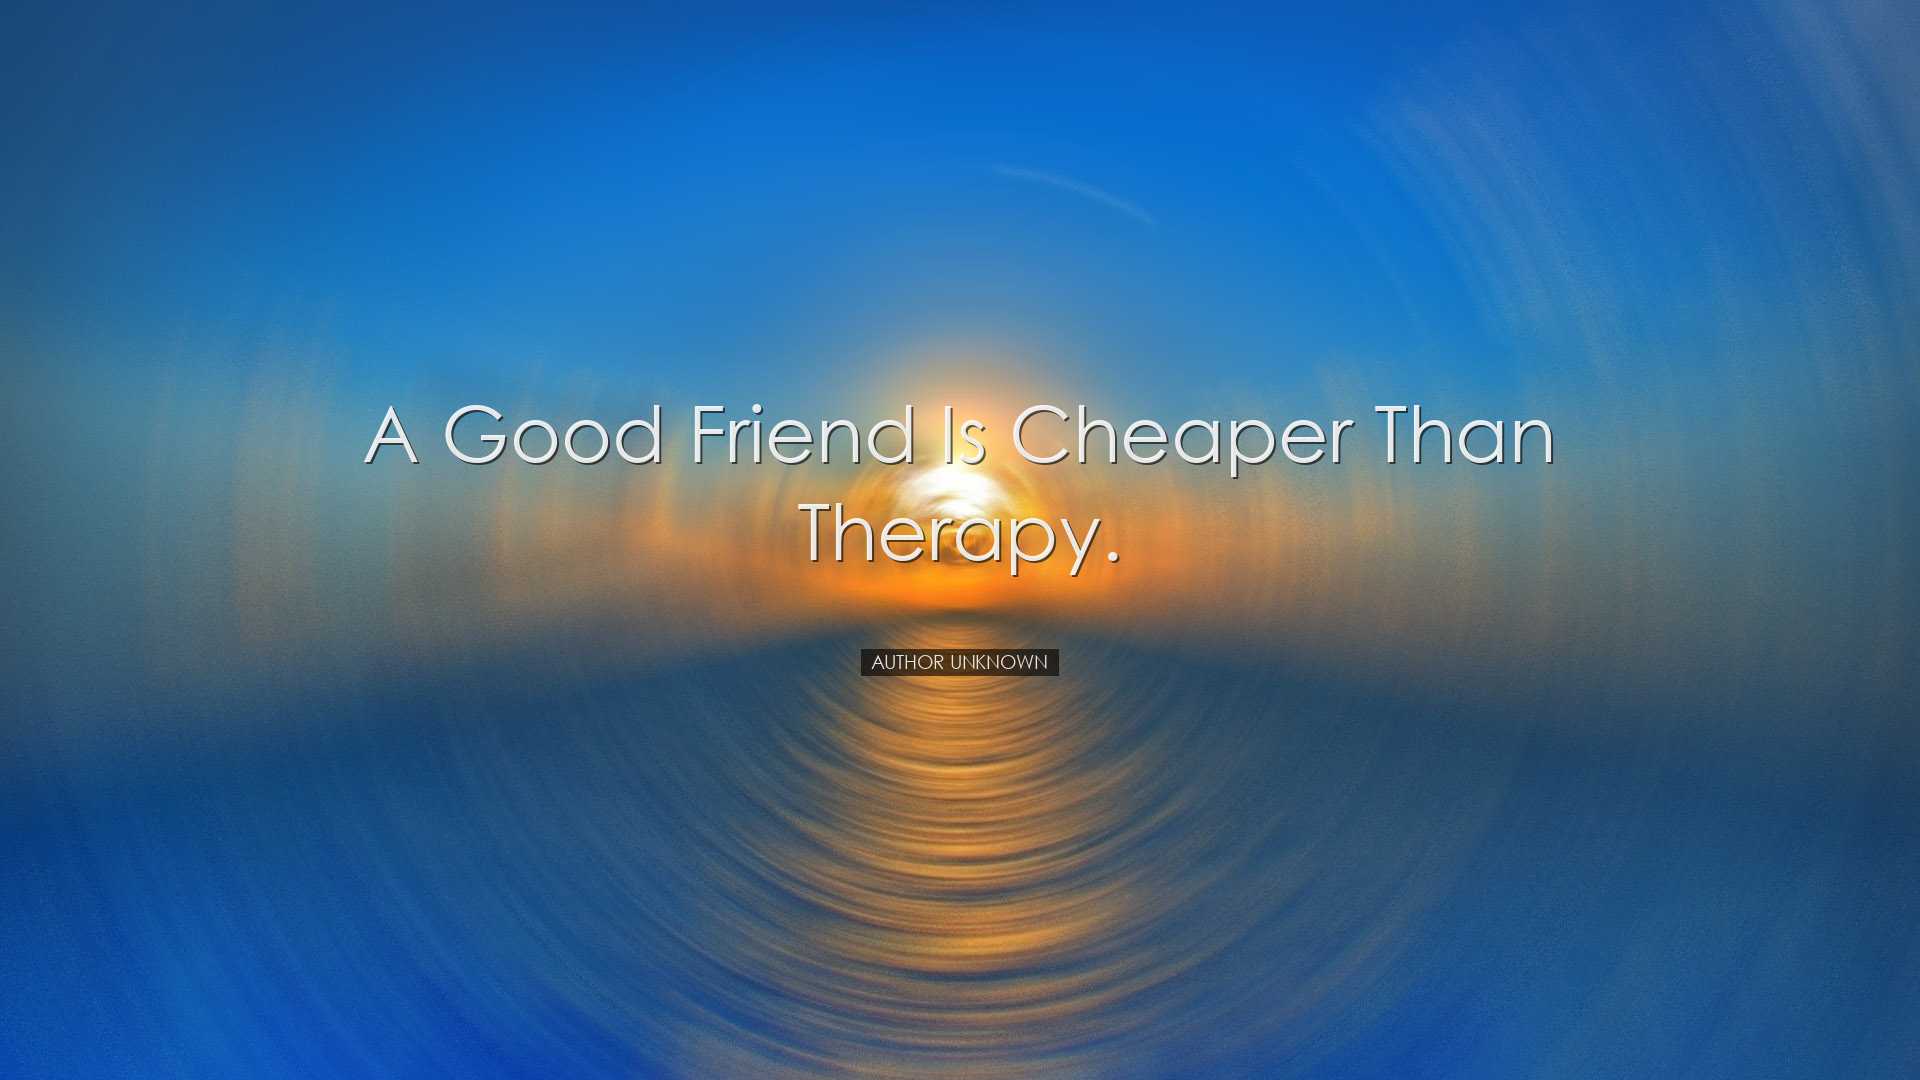 A good friend is cheaper than therapy. - Author Unknown